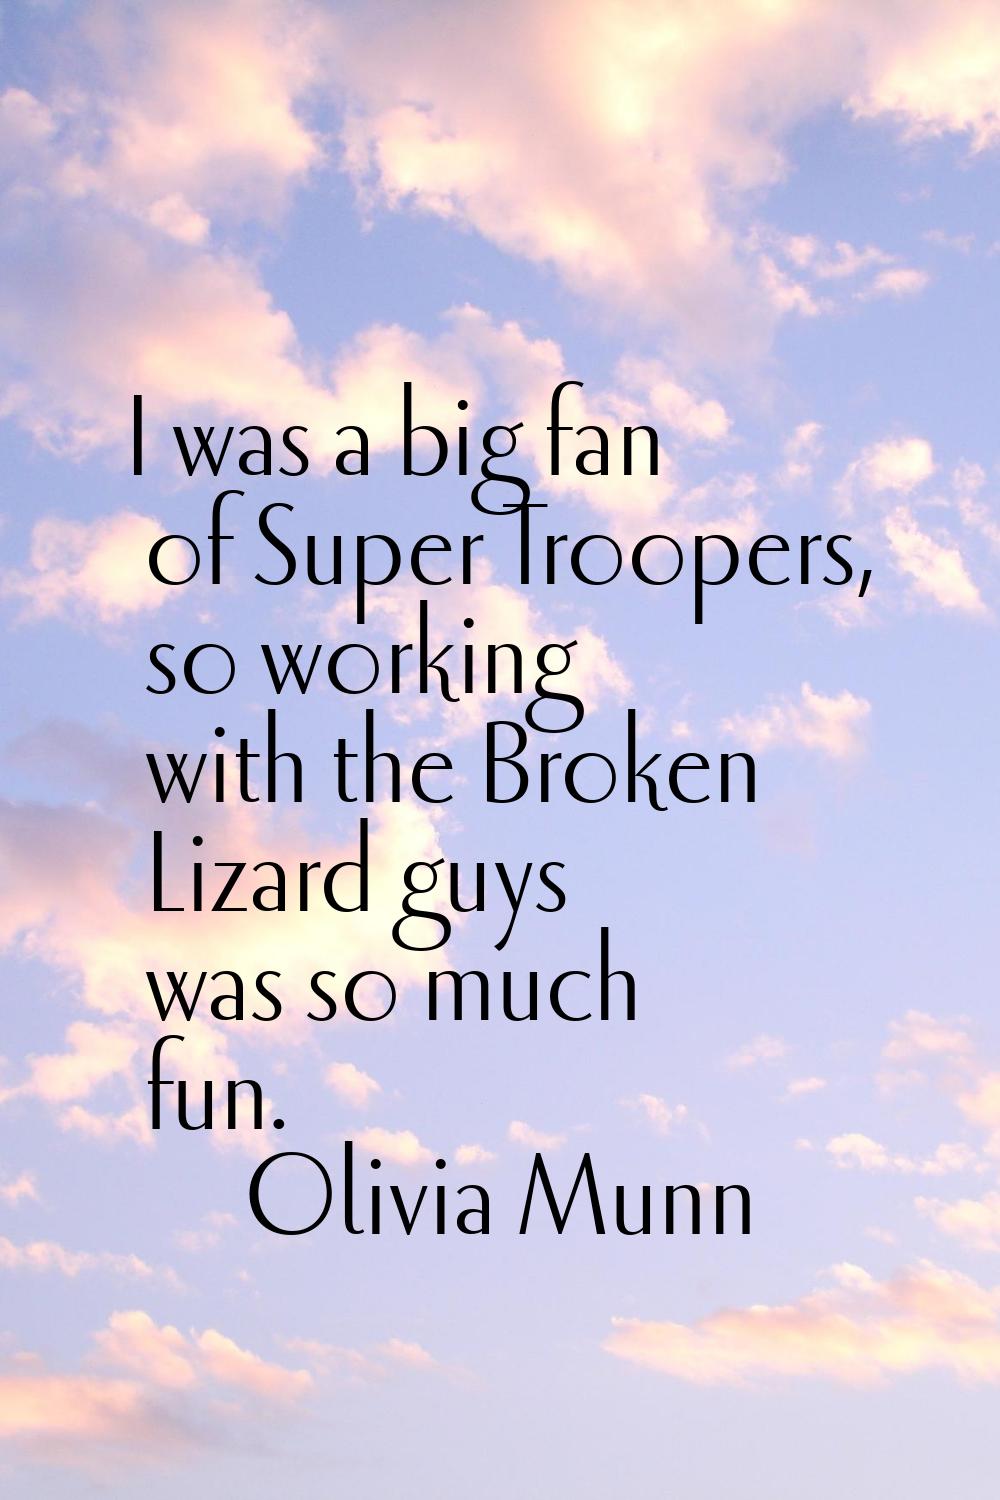 I was a big fan of Super Troopers, so working with the Broken Lizard guys was so much fun.